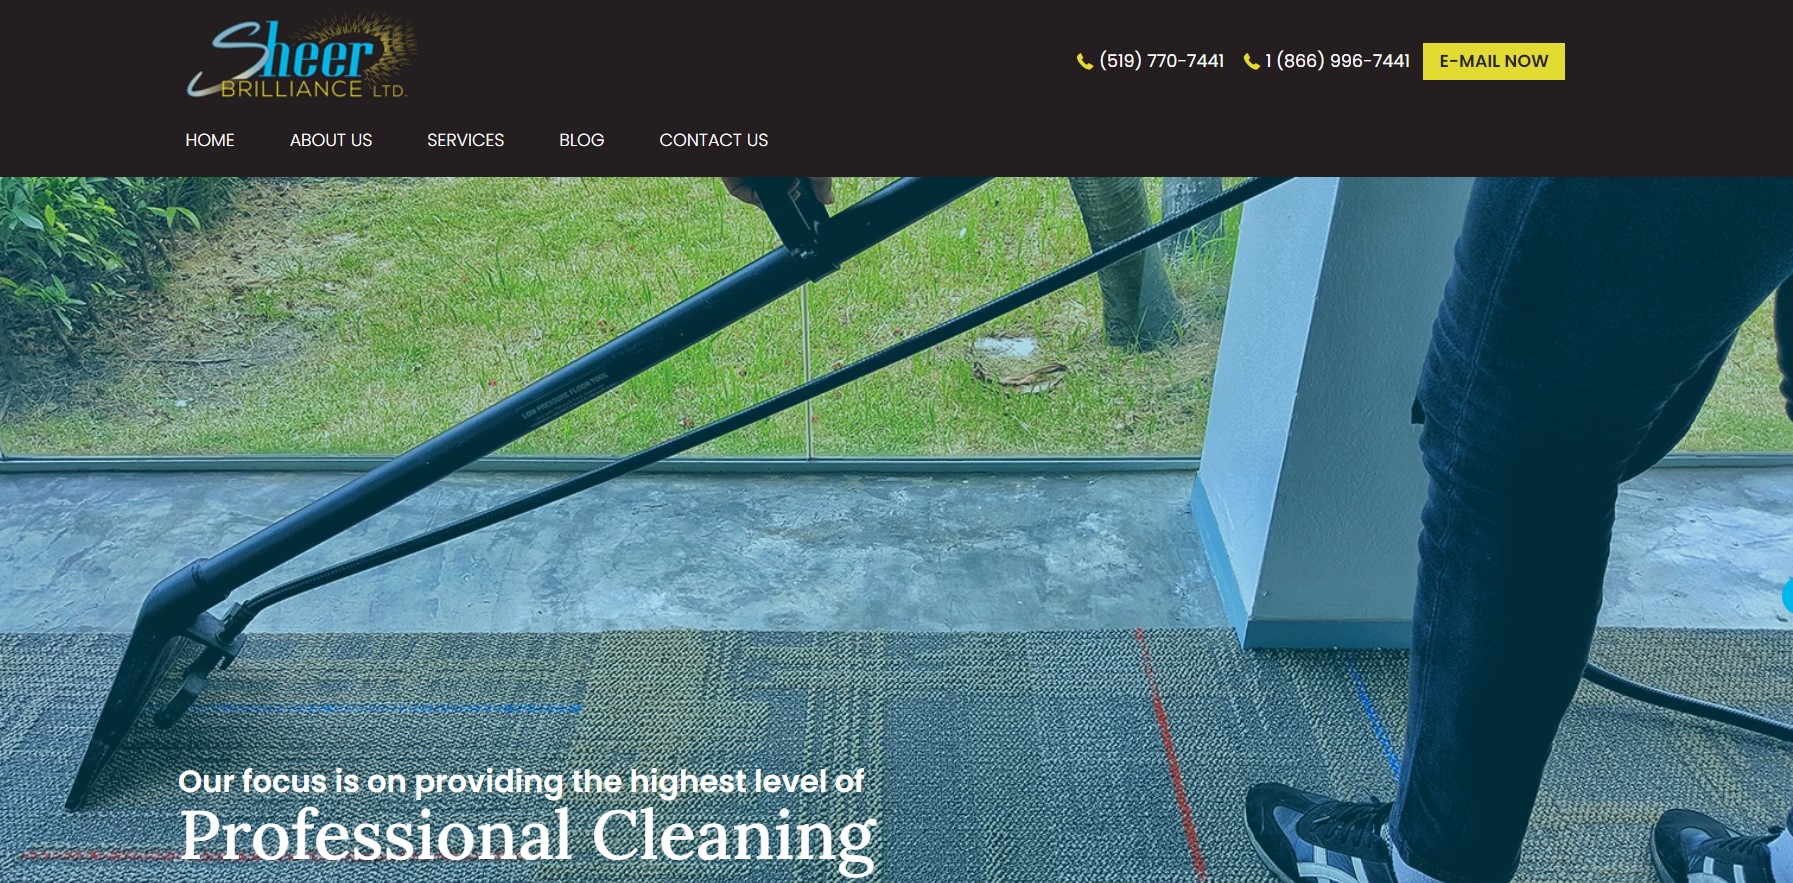 sheer brilliance carpet cleaning service in hamilton